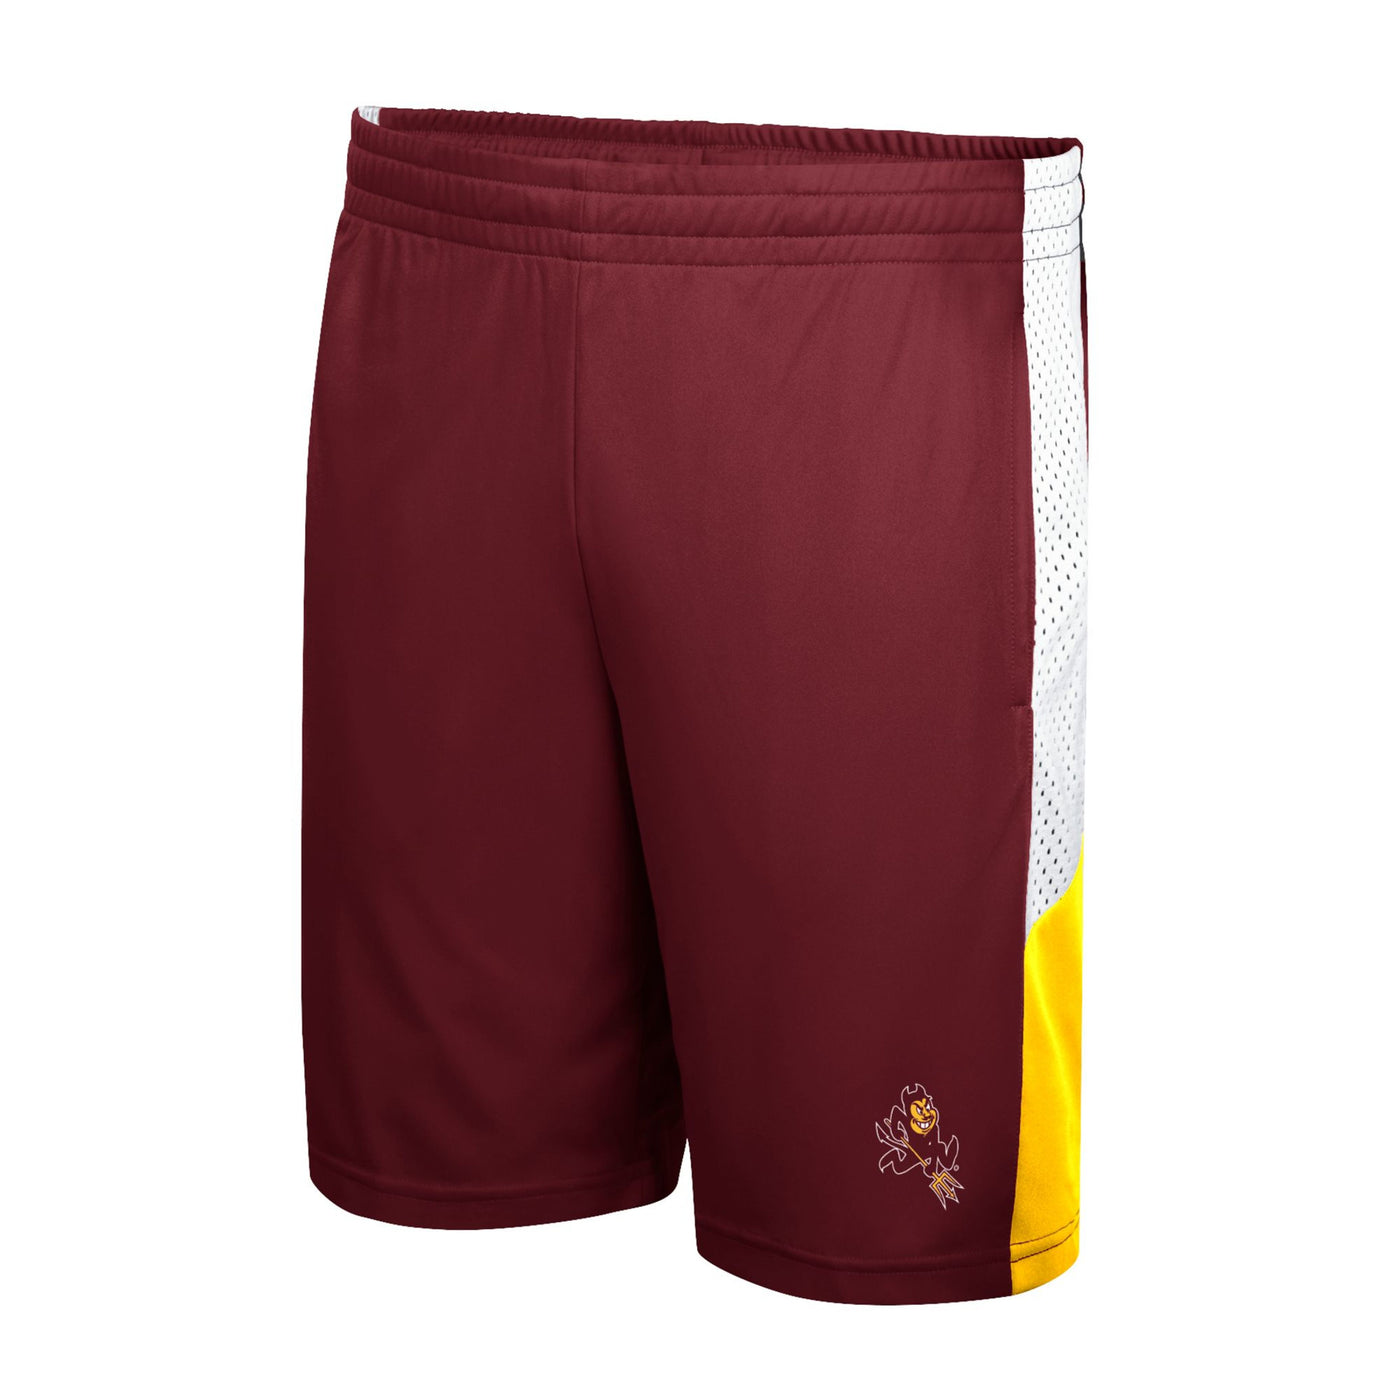 ASU youth maroon shorts with white mesh sides ending in gold and a Sparky on the left bottom leg